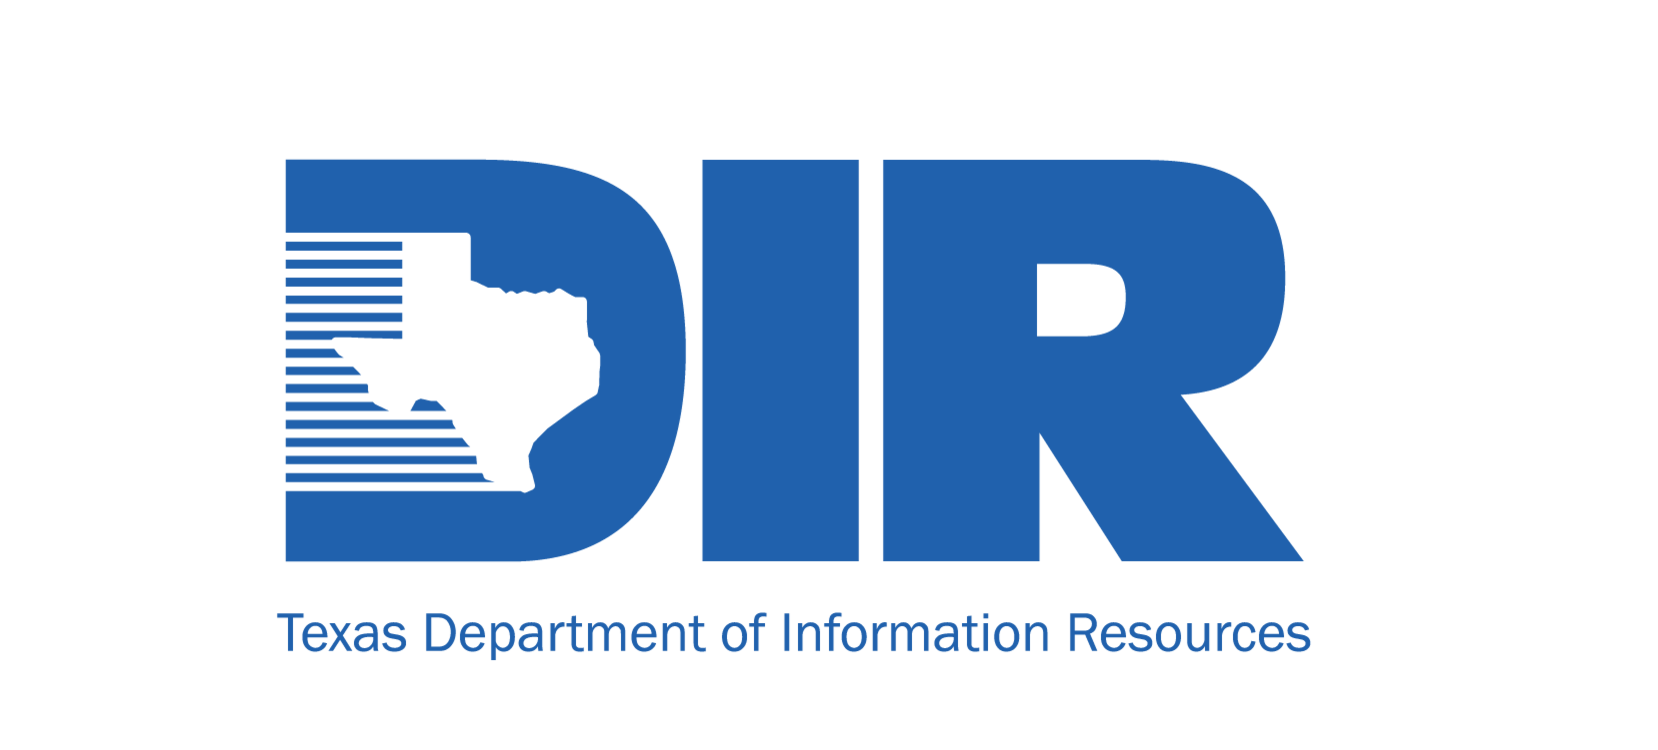 Division of information resources logo